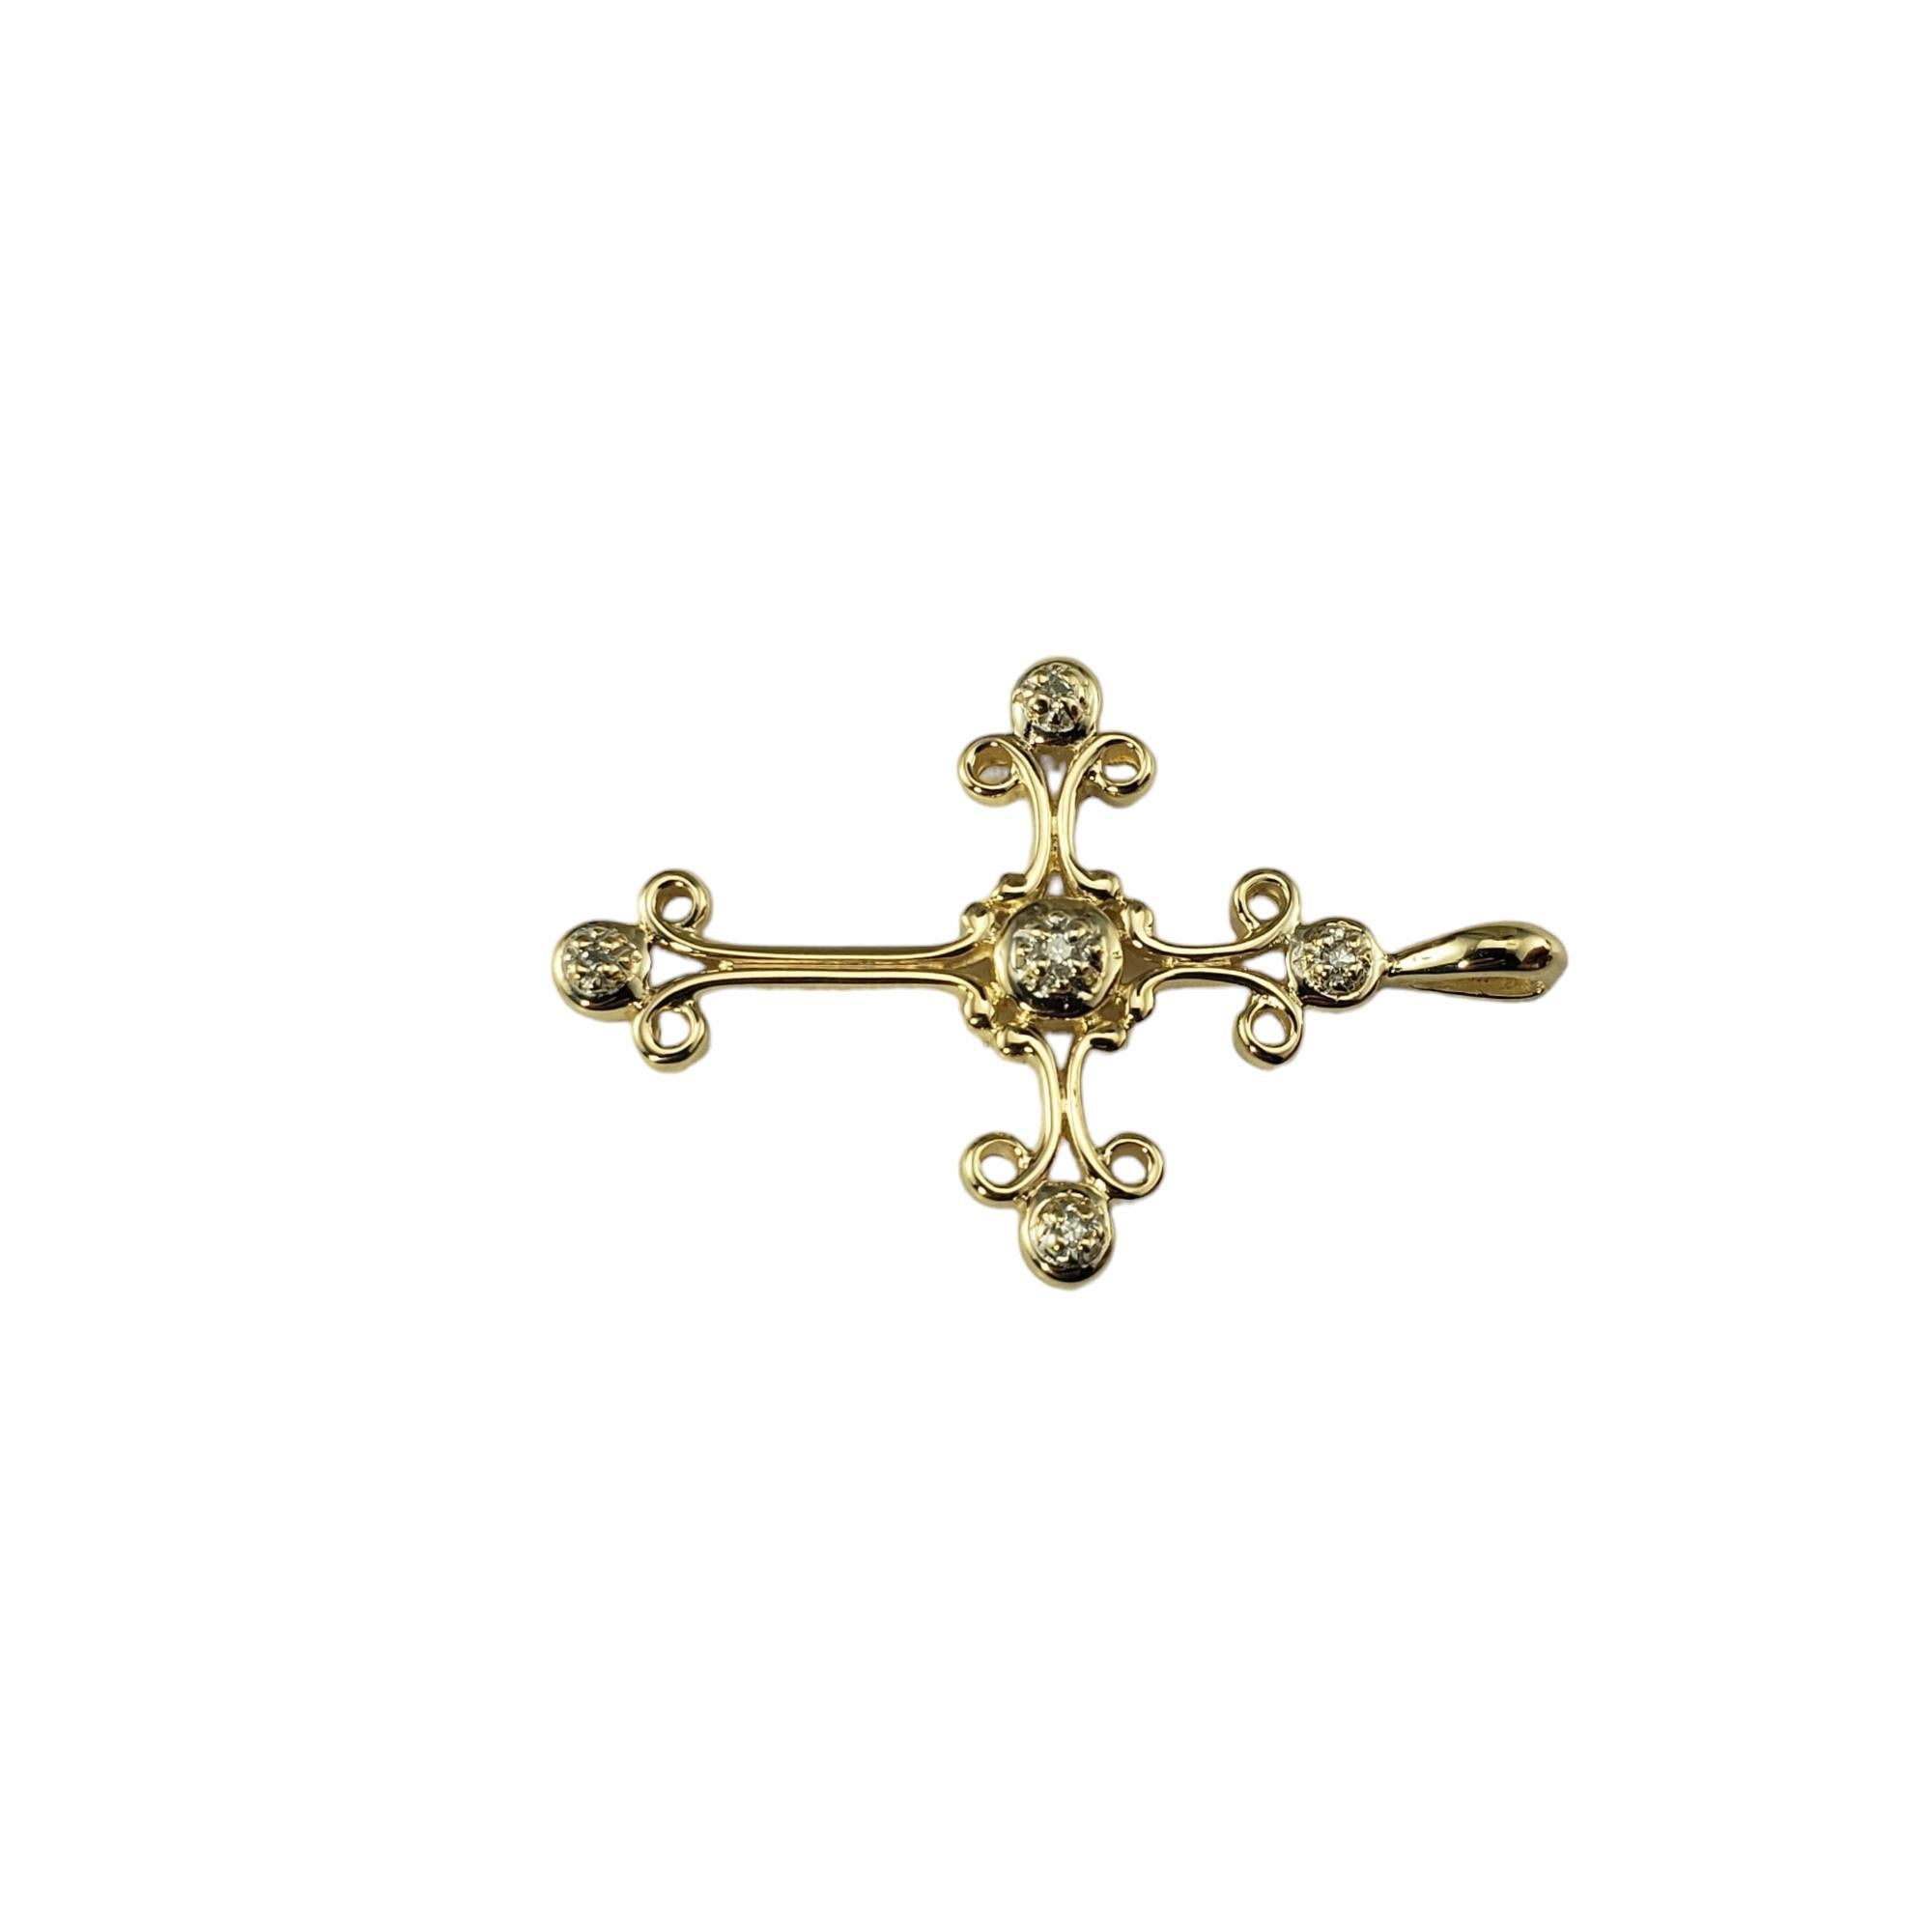 14 Karat Yellow Gold and Diamond Cross Pendant

This elegant cross pendant features five round single cut diamonds set in beautifully detailed 14K yellow gold.

Approximate total diamond weight: .05 ct.

Diamond color: I

Diamond clarity: I

Size: